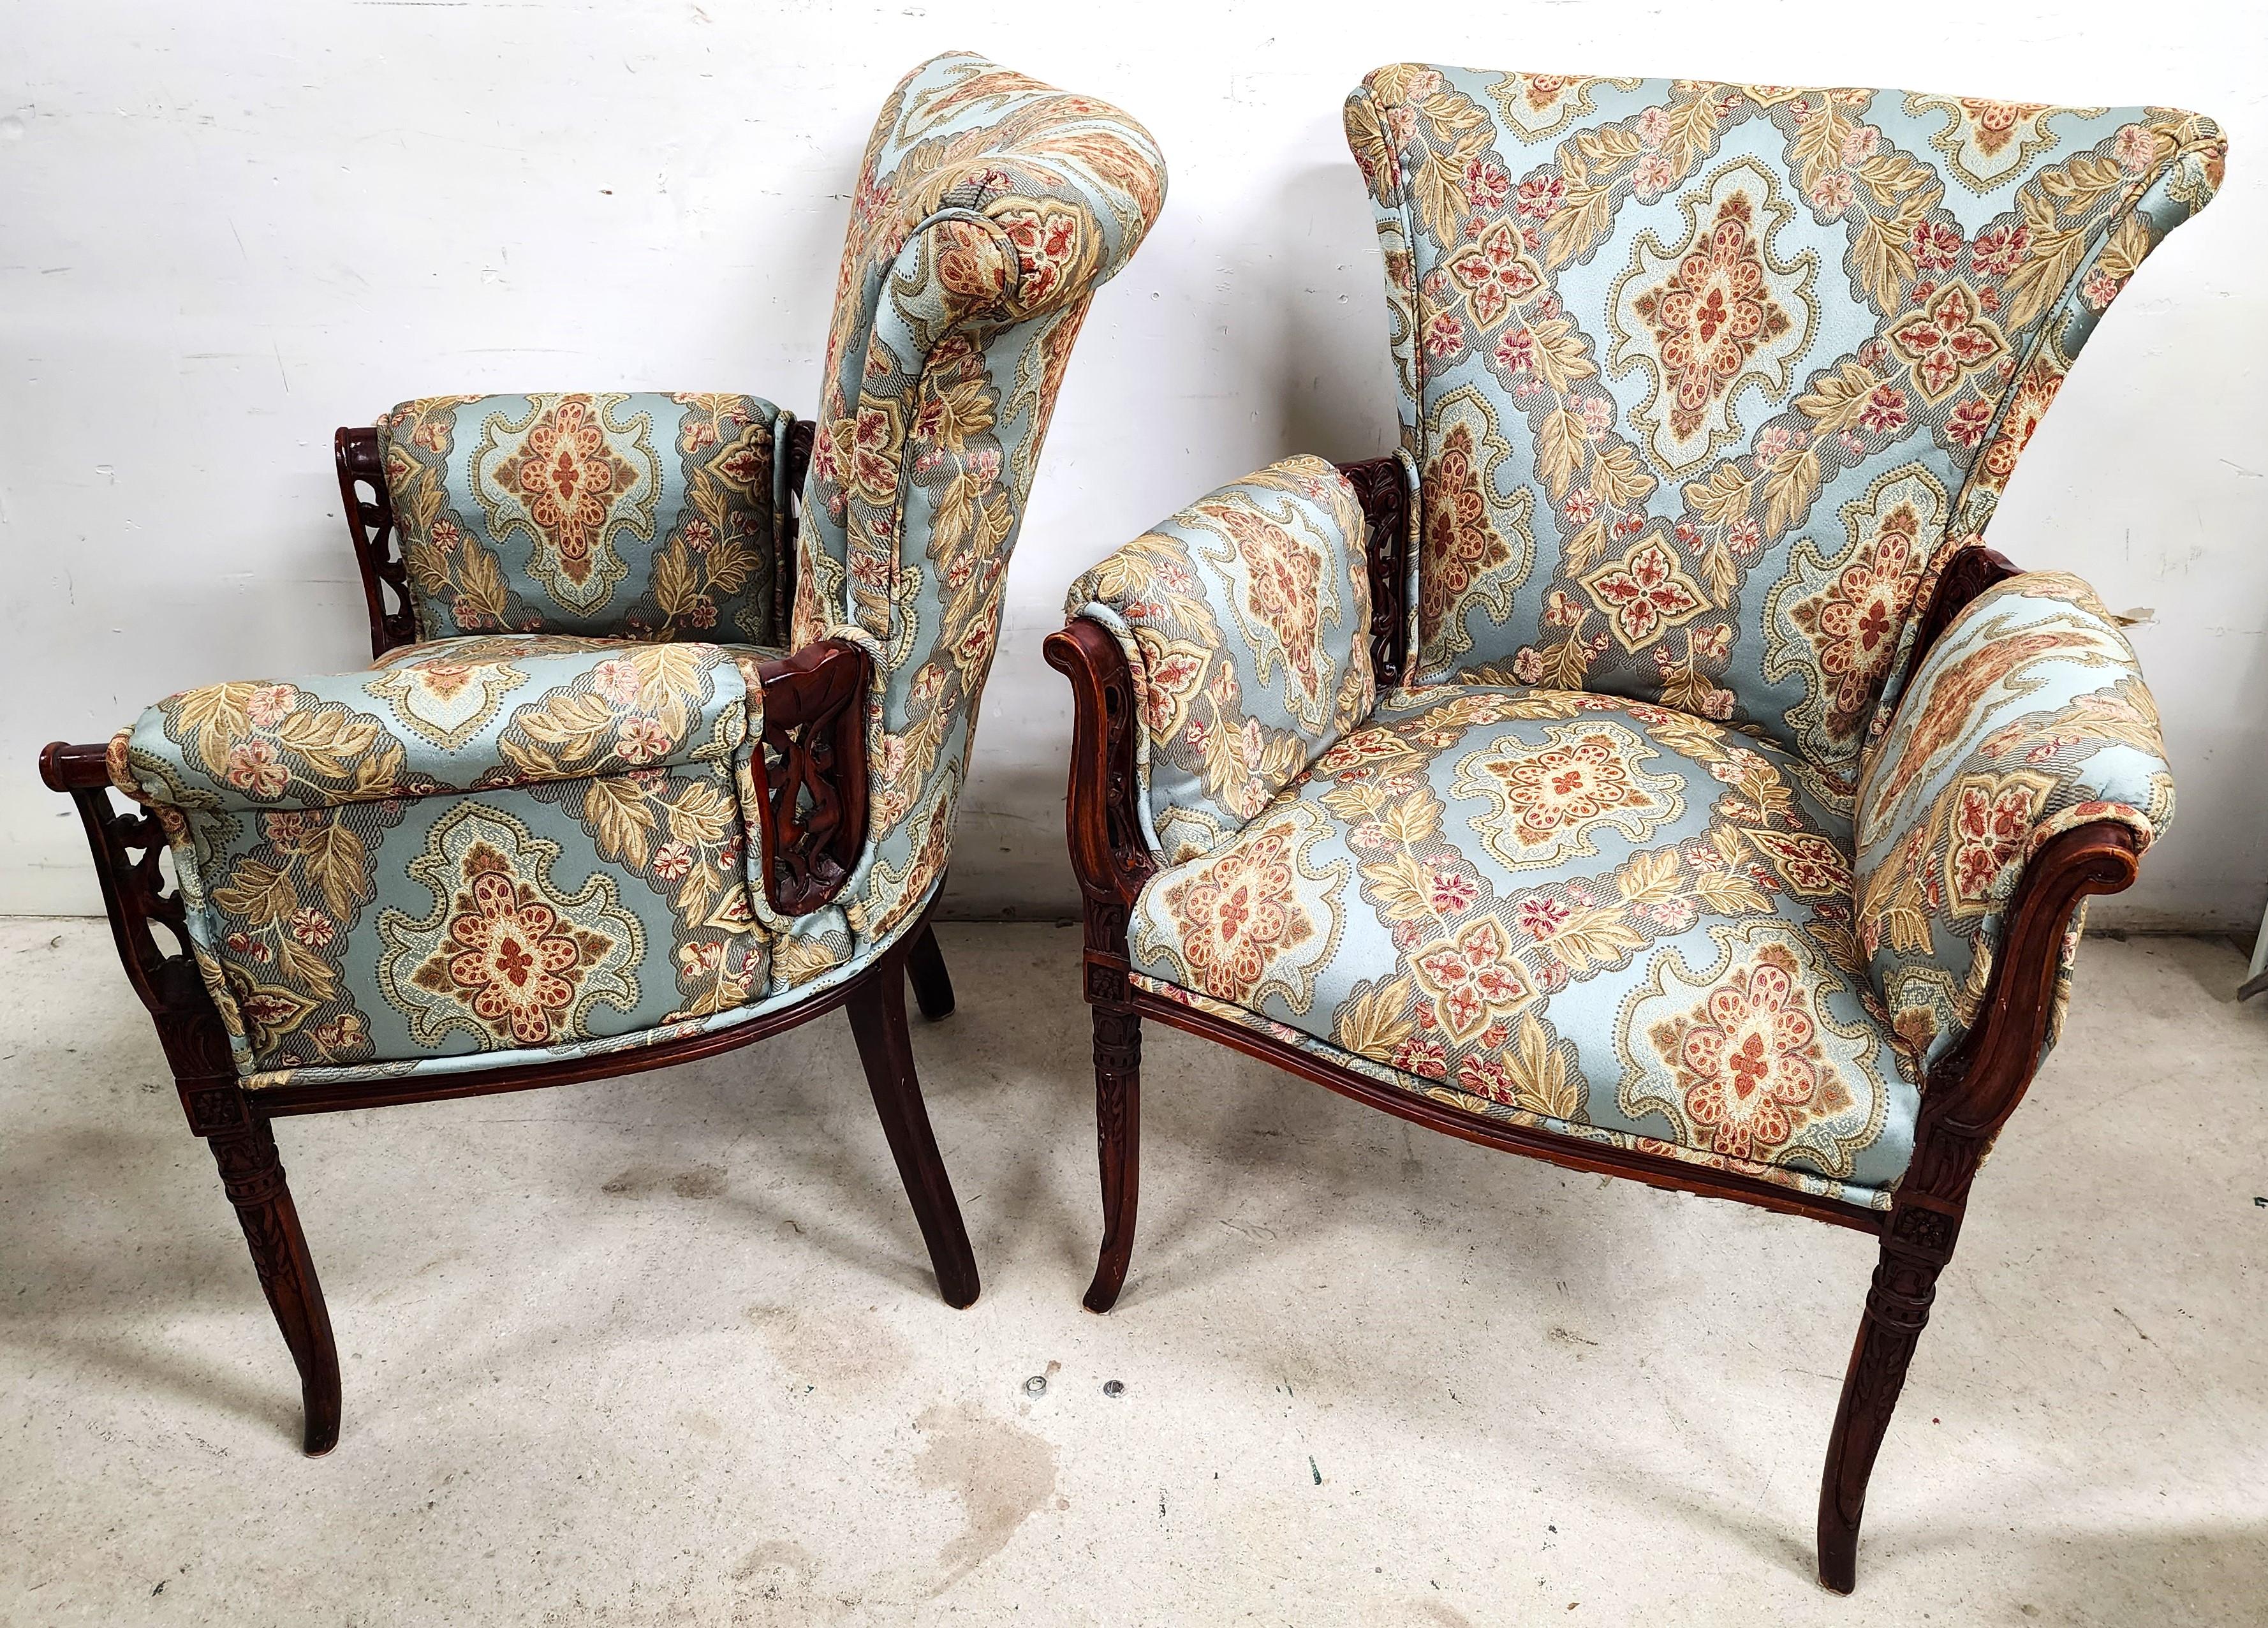 For FULL item description click on CONTINUE READING at the bottom of this page.

Offering One Of Our Recent Palm Beach Estate Fine Furniture Acquisitions Of A
Pair of Antique GROSFELD HOUSE Armchairs with Carved Rosewood Frames

Approximate